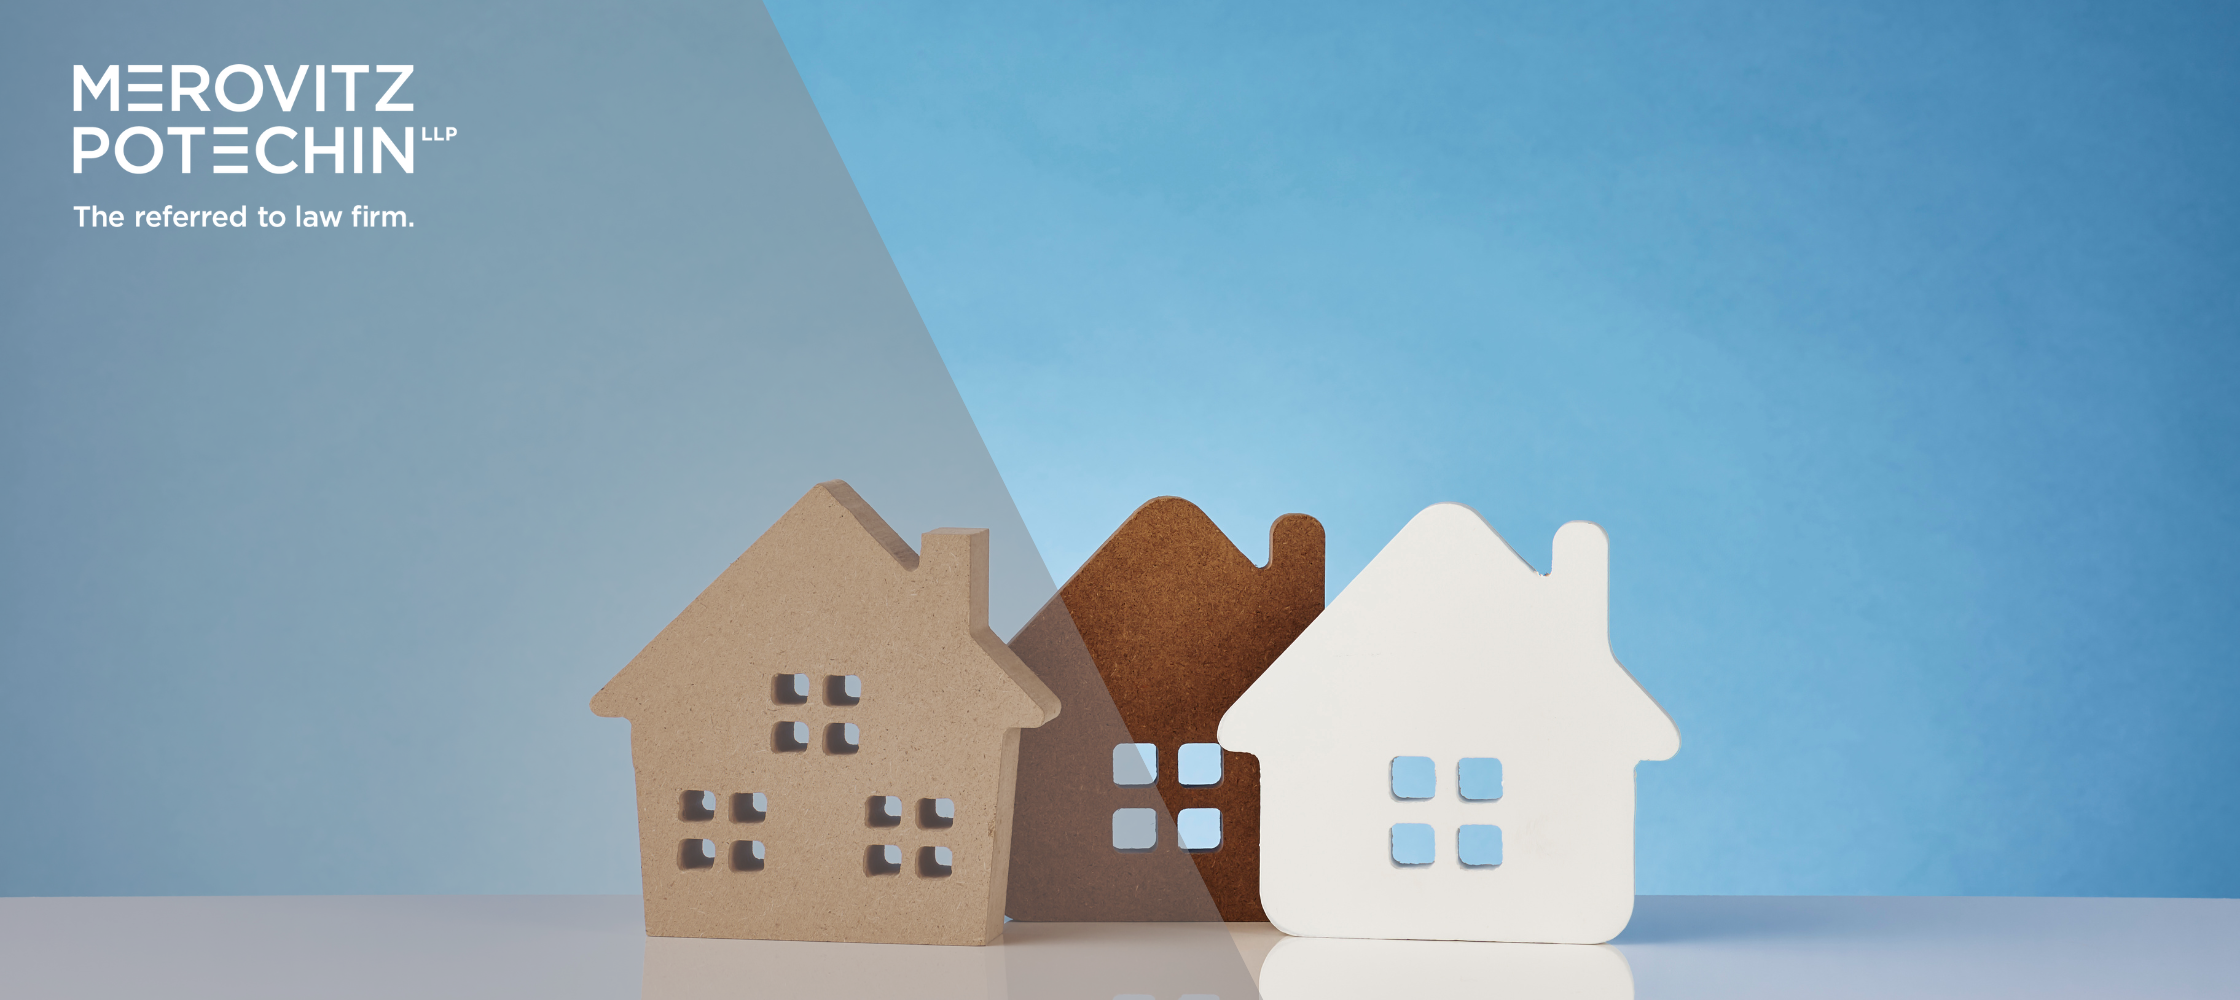 Three small house models in different shades of brown and white, with the Merovitz Potechin LLP logo and the text 'The referred to law firm' in the top left corner against a blue background.